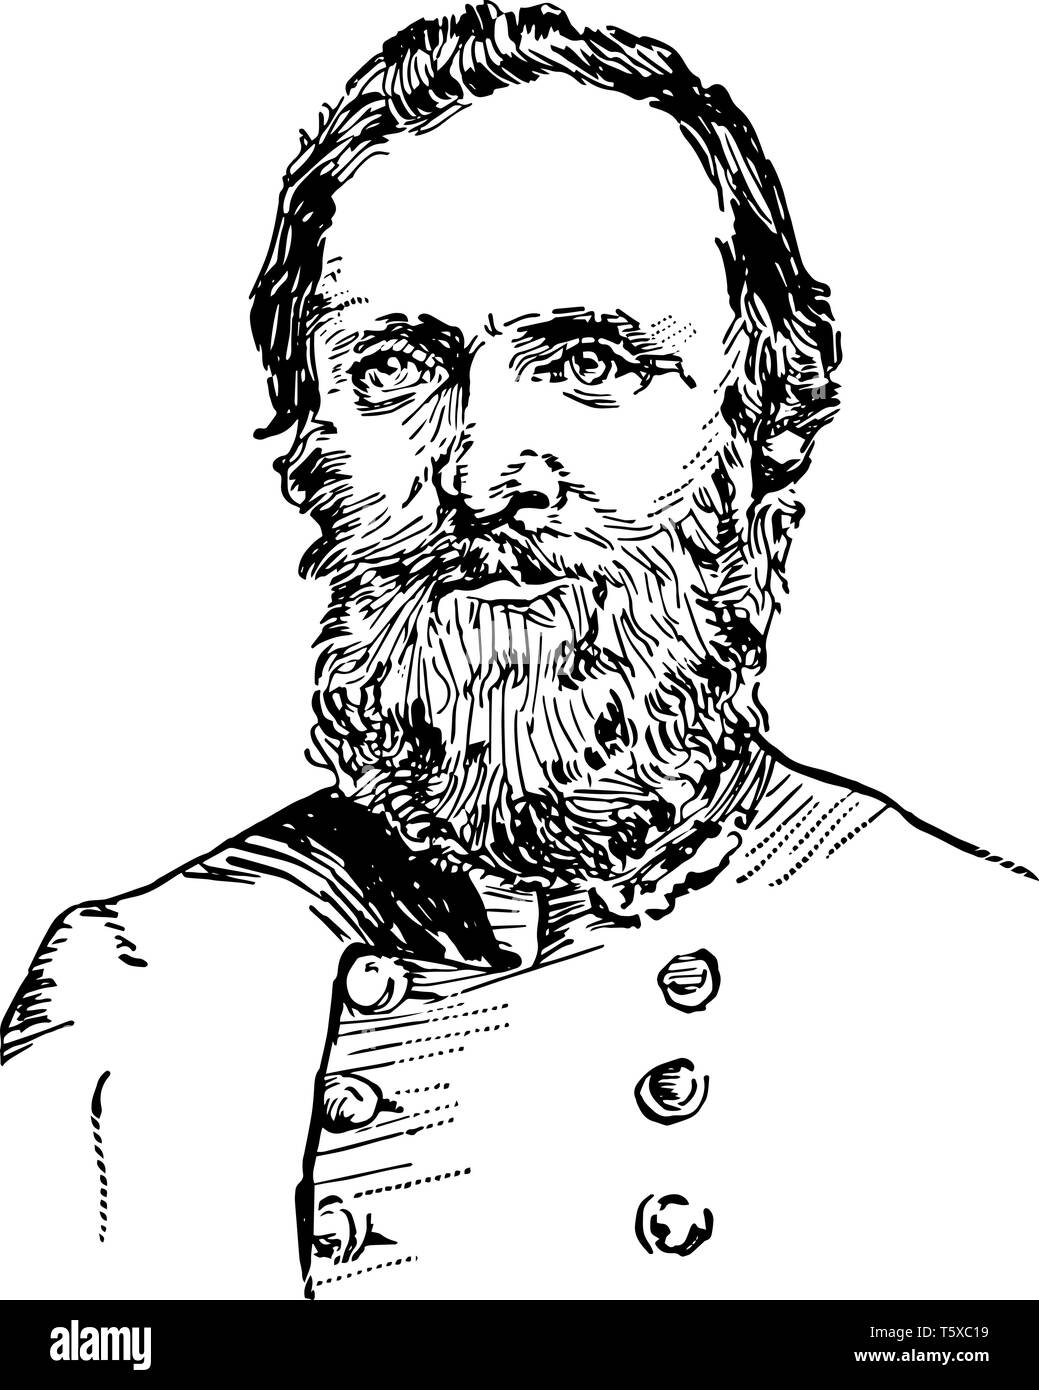 Thomas J. Stonewall Jackson 1824 to 1863 he was a confederate general during the American civil war vintage line drawing or engraving illustration Stock Vector